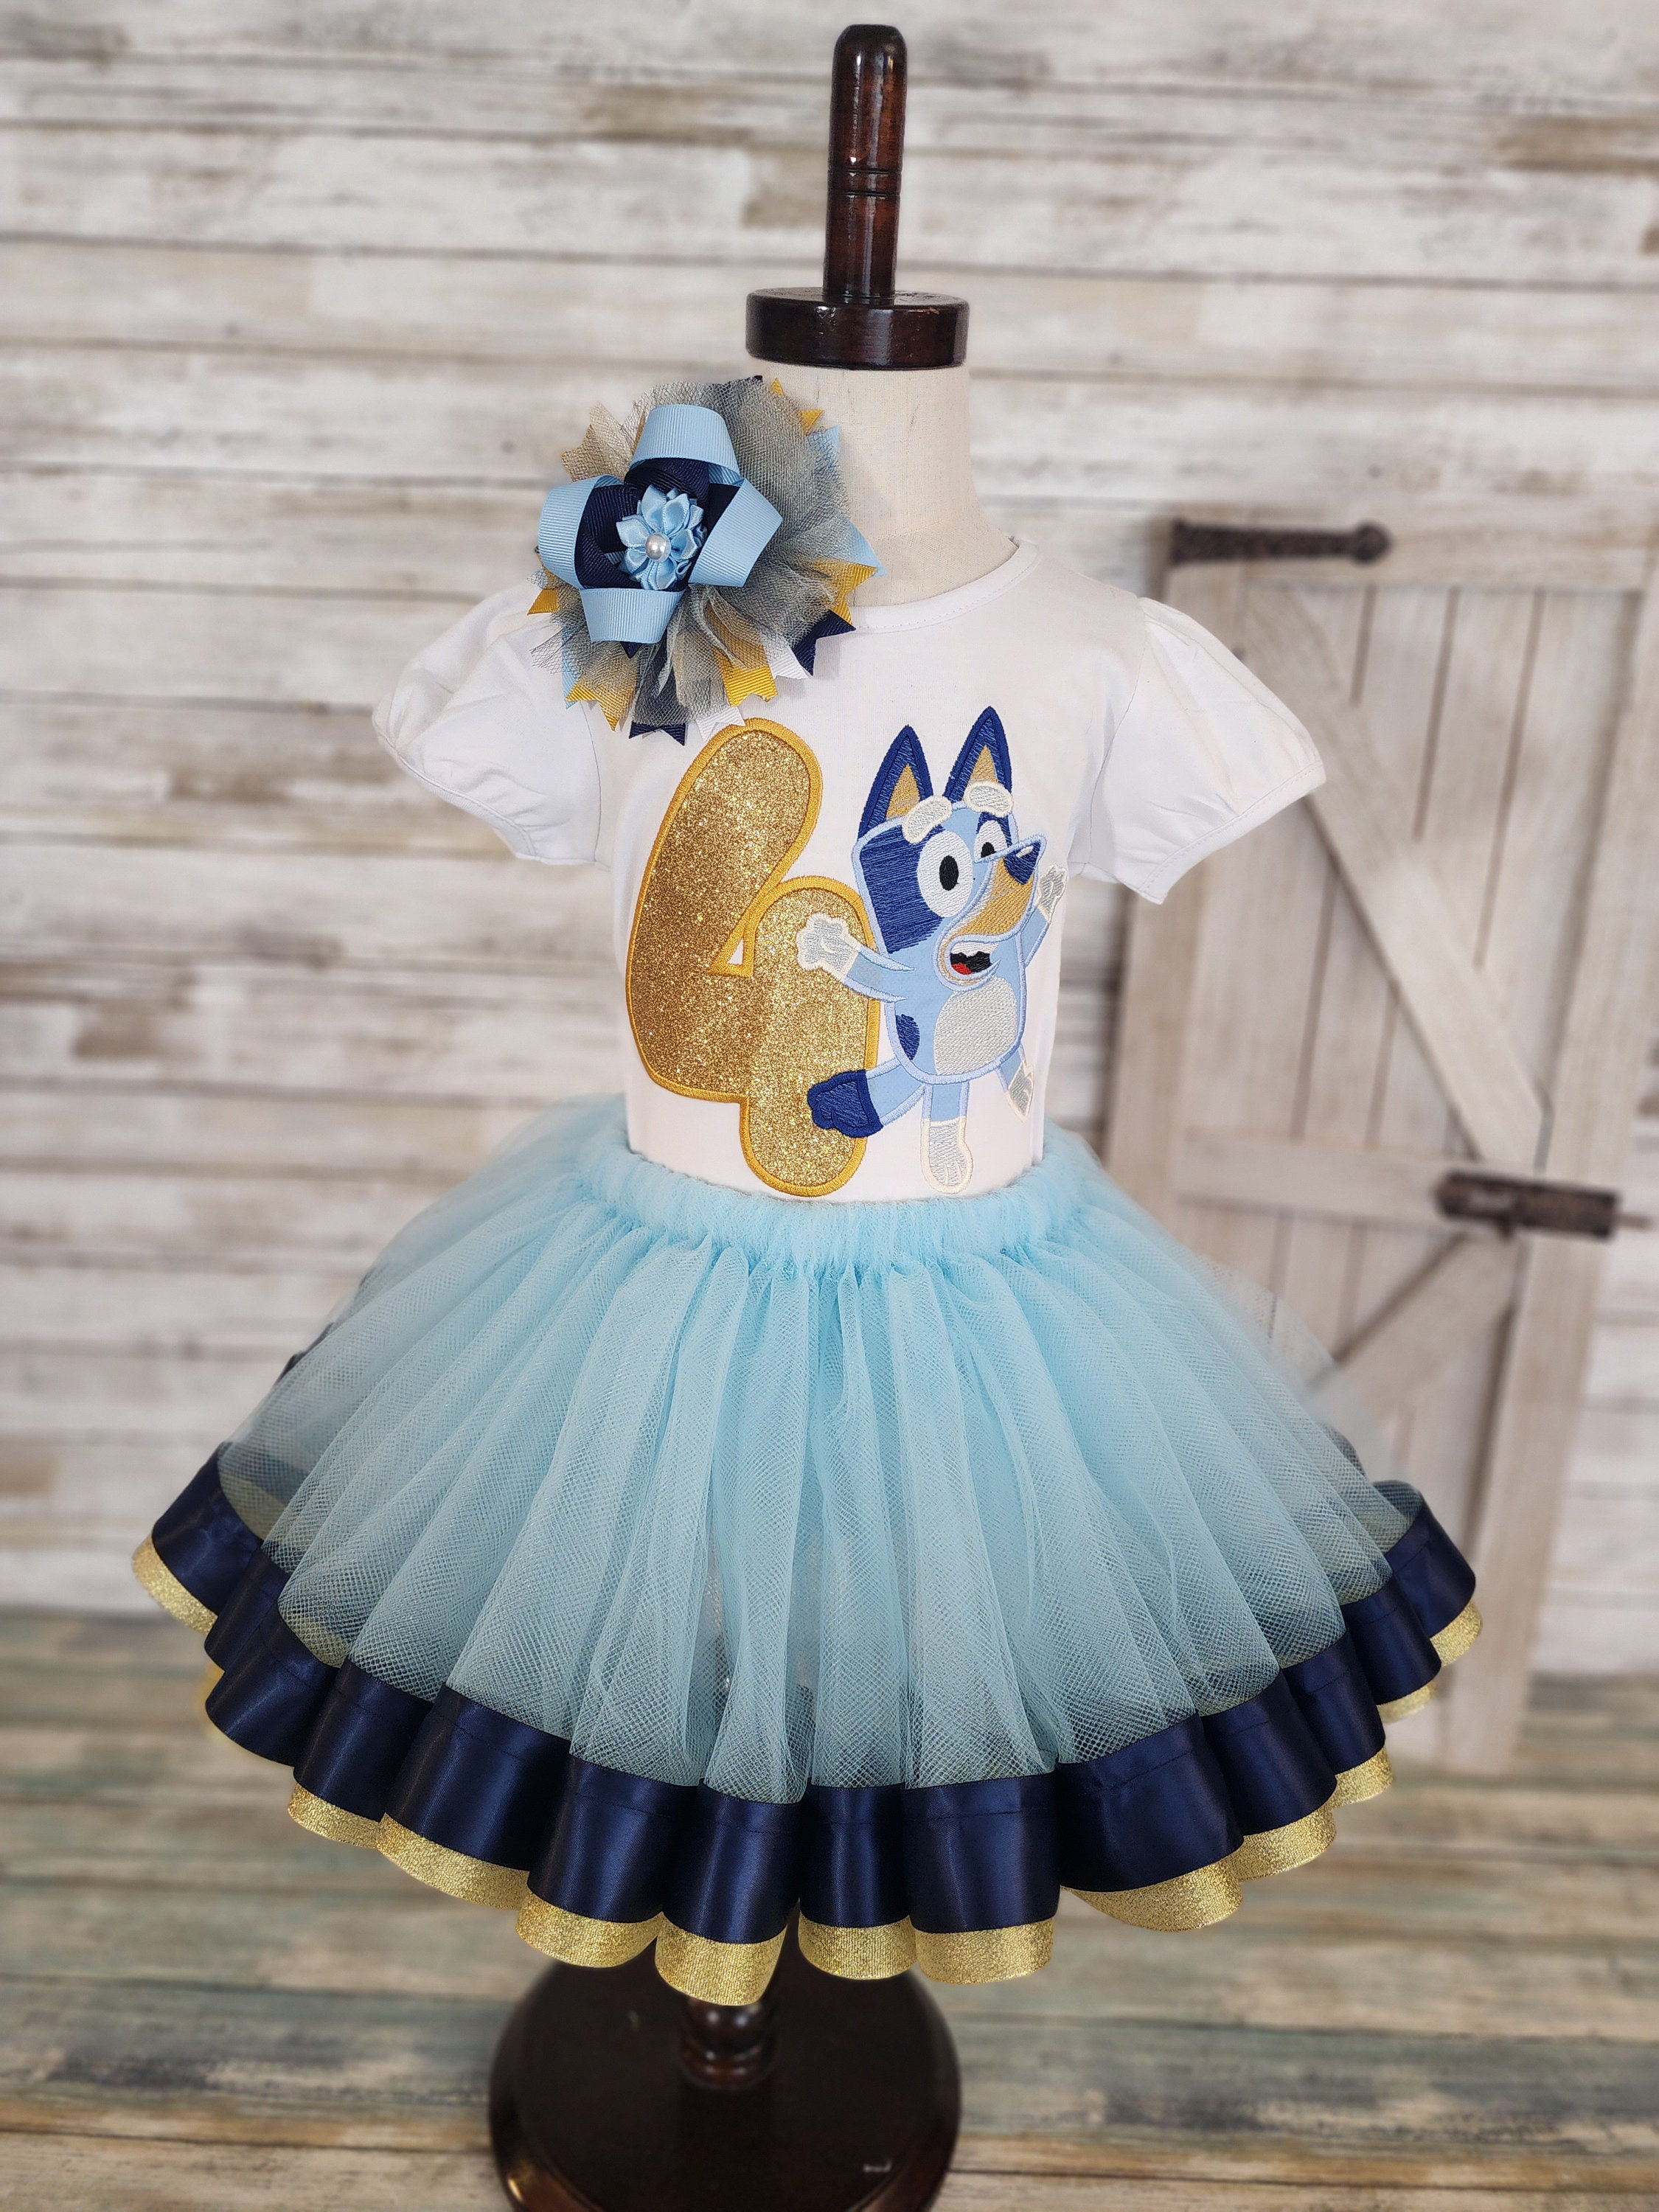 ReignBowsNtoes Bluey Outfit- Bluey Birthday Outfit- Bluey Denim Set 4T